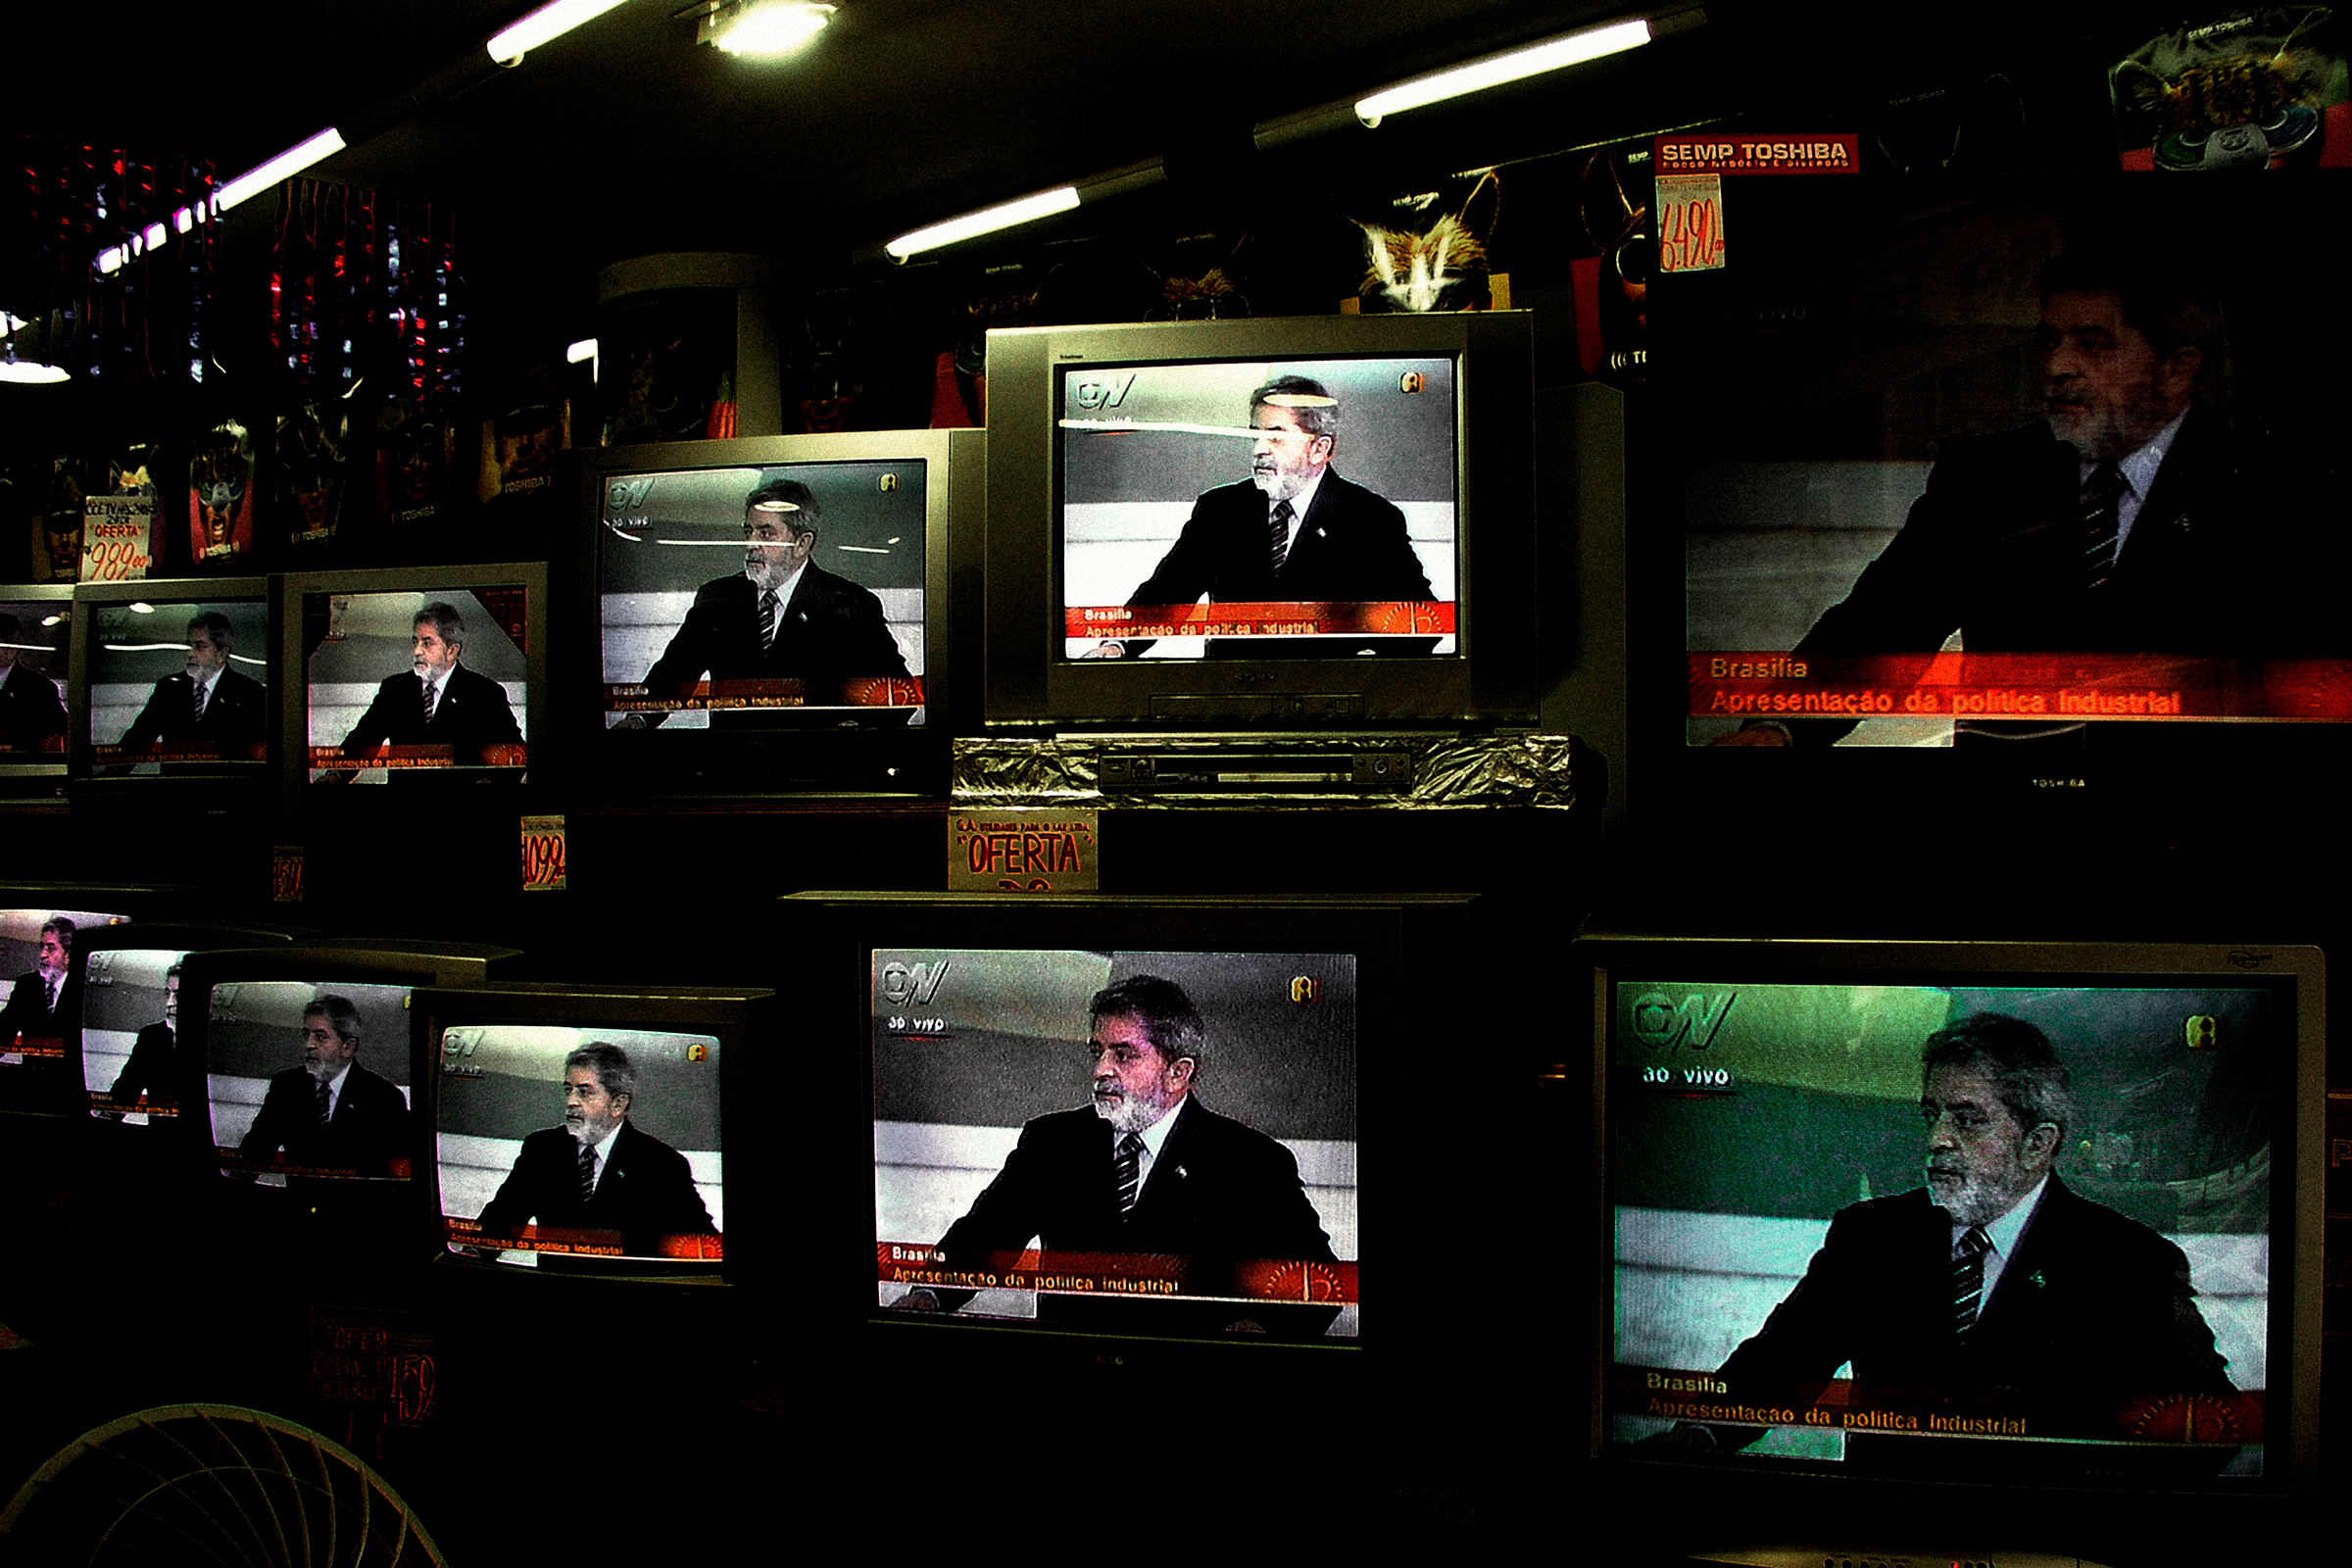 Lula is seen on television giving a speech responding to accusations of corruption against his government, inside a shop in São Paulo in 2004. (Alex Majoli—Magnum Photos)